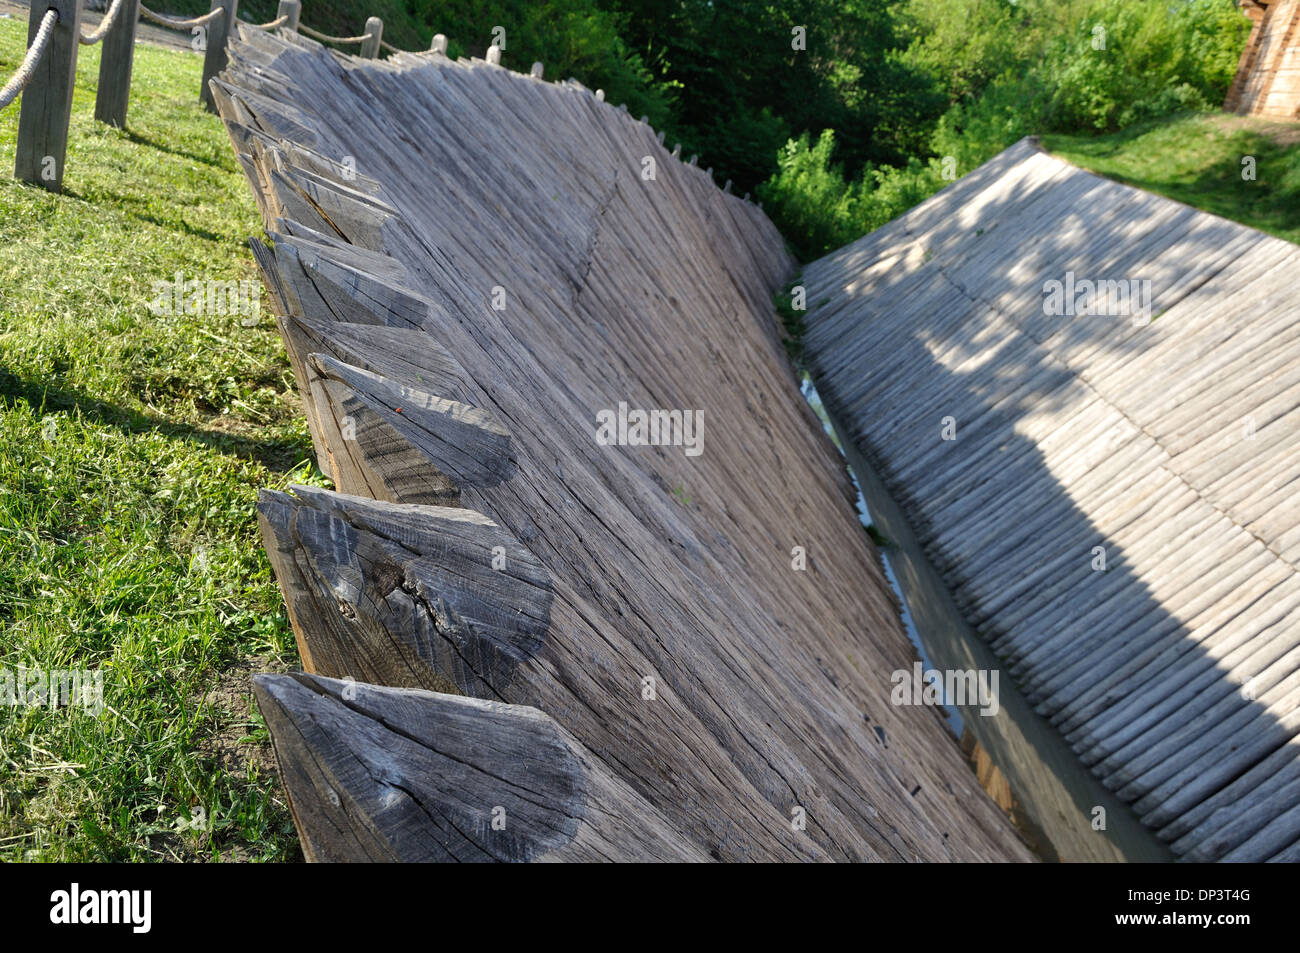 sharp wooden paling as part of old fort moat Stock Photo